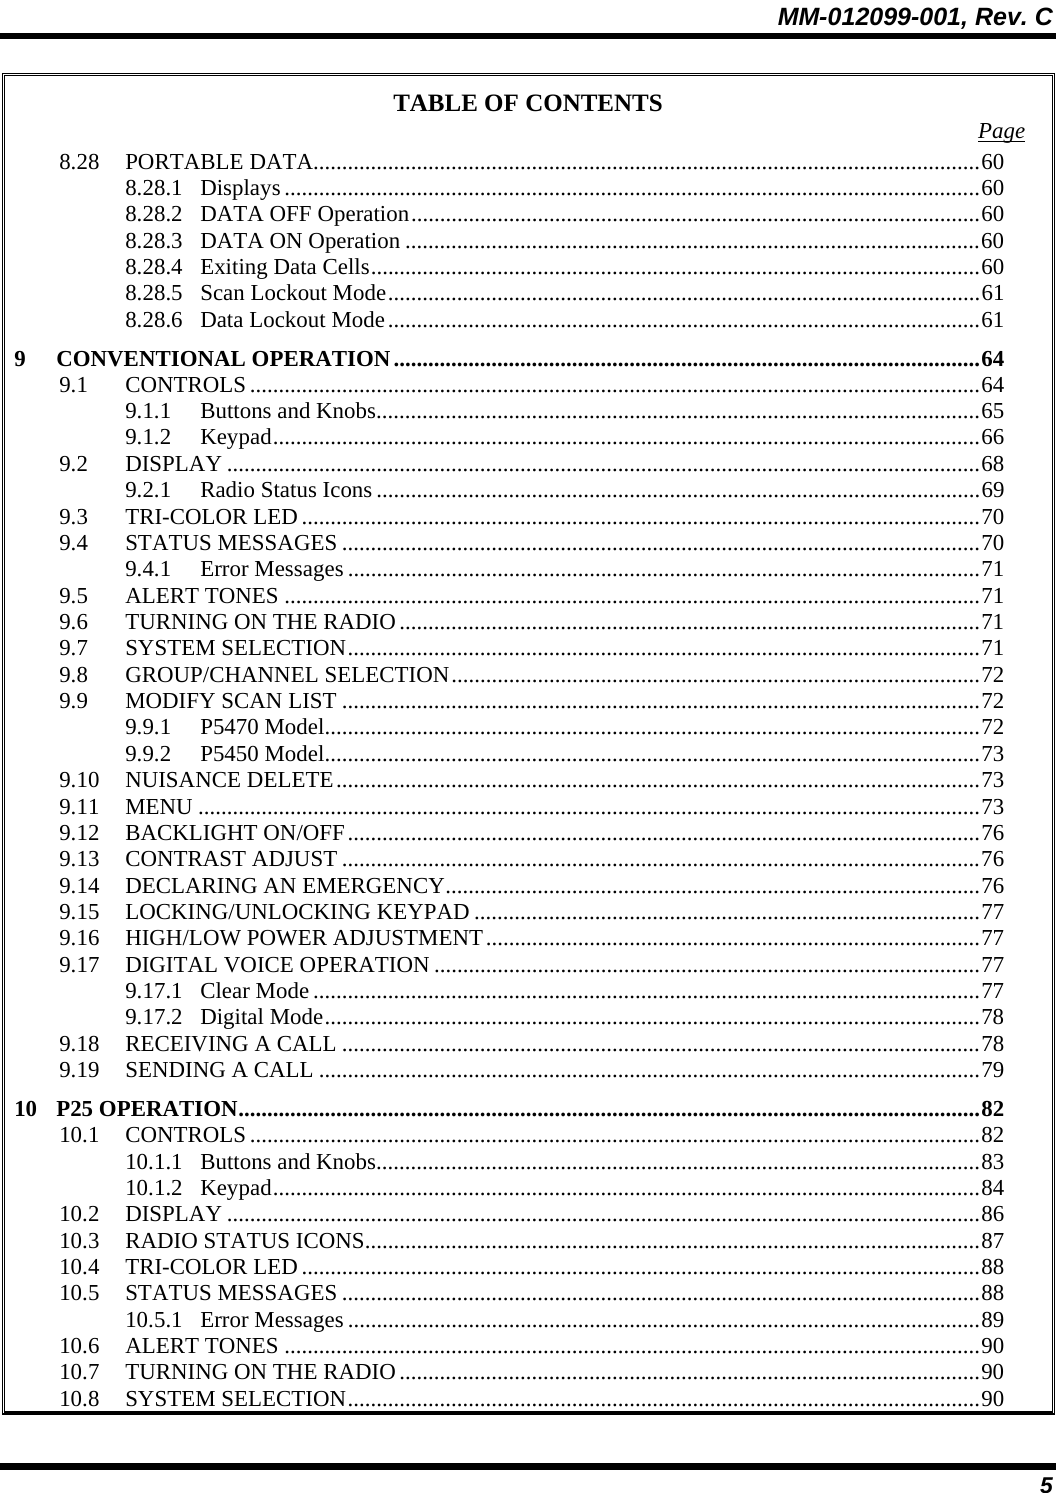 MM-012099-001, Rev. C 5 TABLE OF CONTENTS  Page 8.28 PORTABLE DATA....................................................................................................................60 8.28.1 Displays .........................................................................................................................60 8.28.2 DATA OFF Operation...................................................................................................60 8.28.3 DATA ON Operation ....................................................................................................60 8.28.4 Exiting Data Cells..........................................................................................................60 8.28.5 Scan Lockout Mode.......................................................................................................61 8.28.6 Data Lockout Mode.......................................................................................................61 9 CONVENTIONAL OPERATION......................................................................................................64 9.1 CONTROLS...............................................................................................................................64 9.1.1 Buttons and Knobs.........................................................................................................65 9.1.2 Keypad...........................................................................................................................66 9.2 DISPLAY ...................................................................................................................................68 9.2.1 Radio Status Icons .........................................................................................................69 9.3 TRI-COLOR LED......................................................................................................................70 9.4 STATUS MESSAGES ...............................................................................................................70 9.4.1 Error Messages ..............................................................................................................71 9.5 ALERT TONES .........................................................................................................................71 9.6 TURNING ON THE RADIO.....................................................................................................71 9.7 SYSTEM SELECTION..............................................................................................................71 9.8 GROUP/CHANNEL SELECTION............................................................................................72 9.9 MODIFY SCAN LIST ...............................................................................................................72 9.9.1 P5470 Model..................................................................................................................72 9.9.2 P5450 Model..................................................................................................................73 9.10 NUISANCE DELETE................................................................................................................73 9.11 MENU ........................................................................................................................................73 9.12 BACKLIGHT ON/OFF..............................................................................................................76 9.13 CONTRAST ADJUST ...............................................................................................................76 9.14 DECLARING AN EMERGENCY.............................................................................................76 9.15 LOCKING/UNLOCKING KEYPAD ........................................................................................77 9.16 HIGH/LOW POWER ADJUSTMENT......................................................................................77 9.17 DIGITAL VOICE OPERATION ...............................................................................................77 9.17.1 Clear Mode....................................................................................................................77 9.17.2 Digital Mode..................................................................................................................78 9.18 RECEIVING A CALL ...............................................................................................................78 9.19 SENDING A CALL ...................................................................................................................79 10 P25 OPERATION.................................................................................................................................82 10.1 CONTROLS...............................................................................................................................82 10.1.1 Buttons and Knobs.........................................................................................................83 10.1.2 Keypad...........................................................................................................................84 10.2 DISPLAY ...................................................................................................................................86 10.3 RADIO STATUS ICONS...........................................................................................................87 10.4 TRI-COLOR LED......................................................................................................................88 10.5 STATUS MESSAGES ...............................................................................................................88 10.5.1 Error Messages ..............................................................................................................89 10.6 ALERT TONES .........................................................................................................................90 10.7 TURNING ON THE RADIO.....................................................................................................90 10.8 SYSTEM SELECTION..............................................................................................................90 